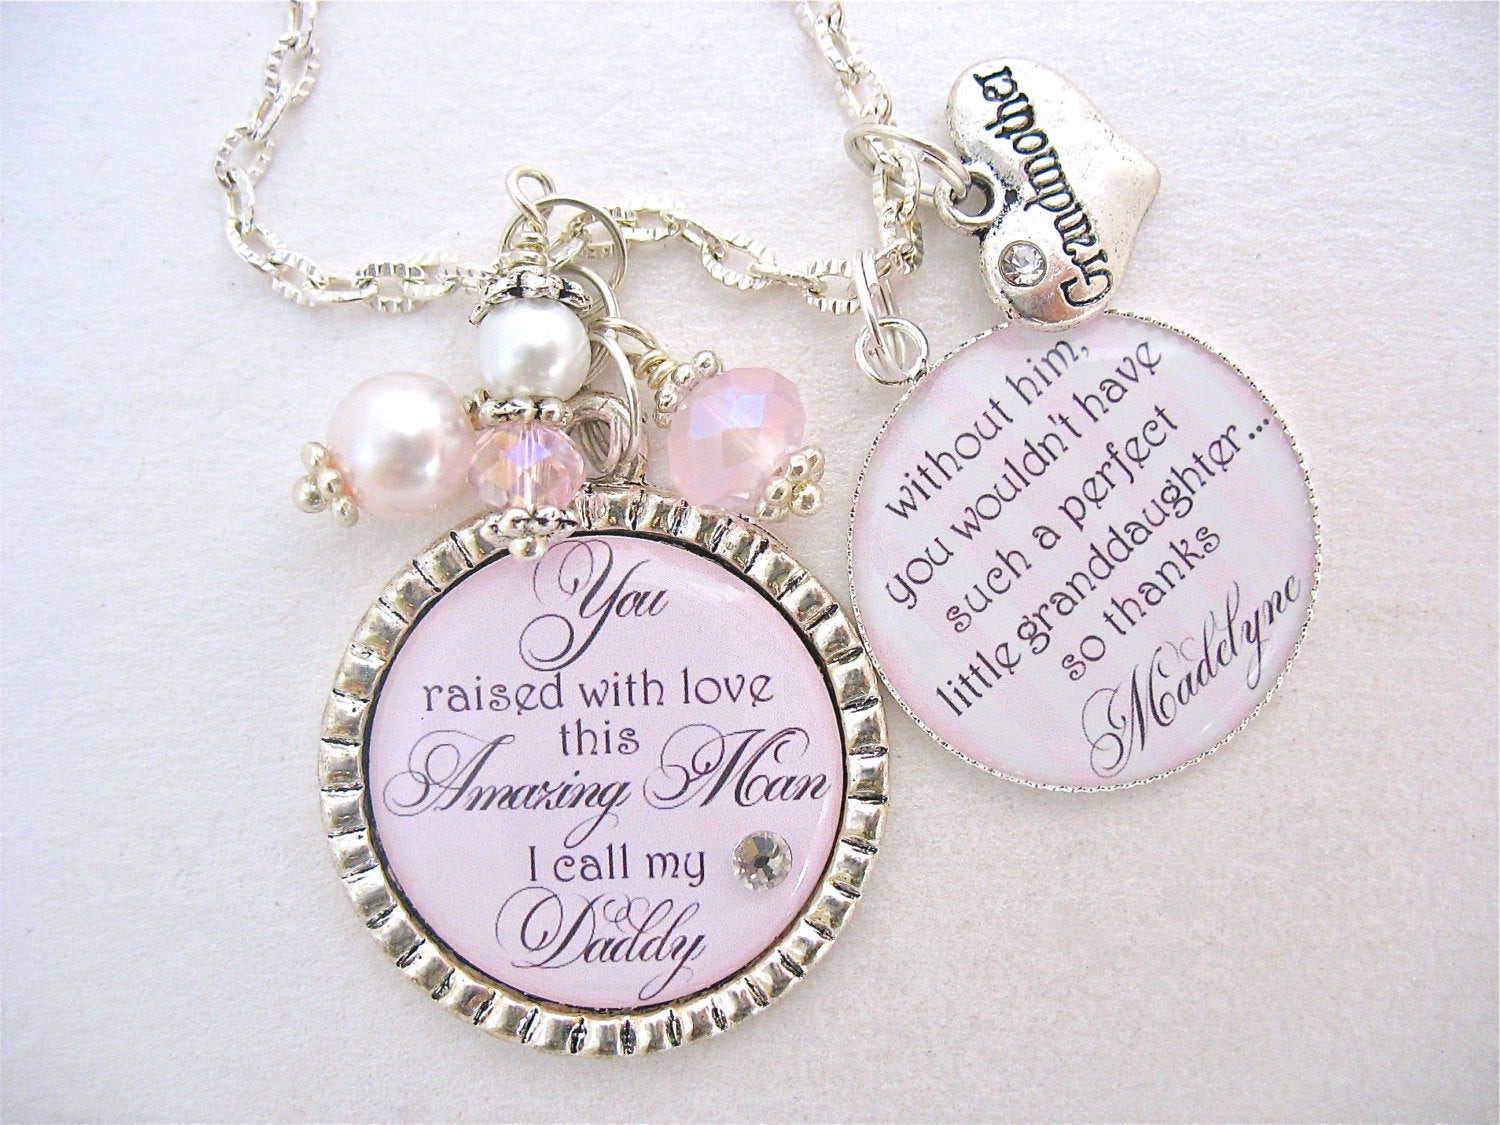 Birthday Gifts For Grandpa From Granddaughter
 GRANDMOTHER GIFT from Granddaughter Personalized Jewelry